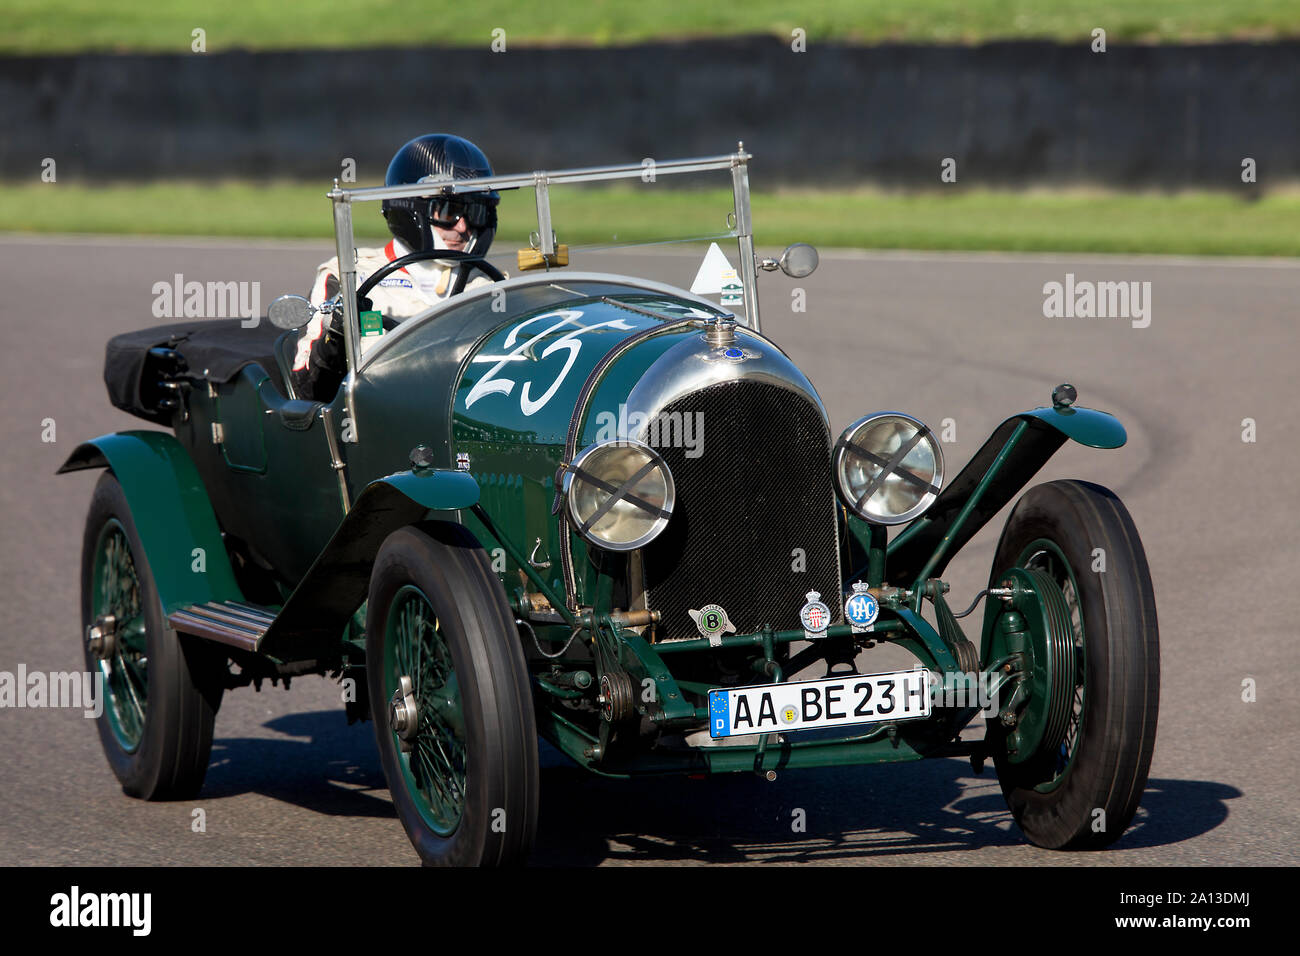 1923 Bentley 3 Litre driven by Ben Collings in the Brooklands Trophy race at The Goodwood Revival 13th Sept 2019 in Chichester, England.  Copyright  M Stock Photo